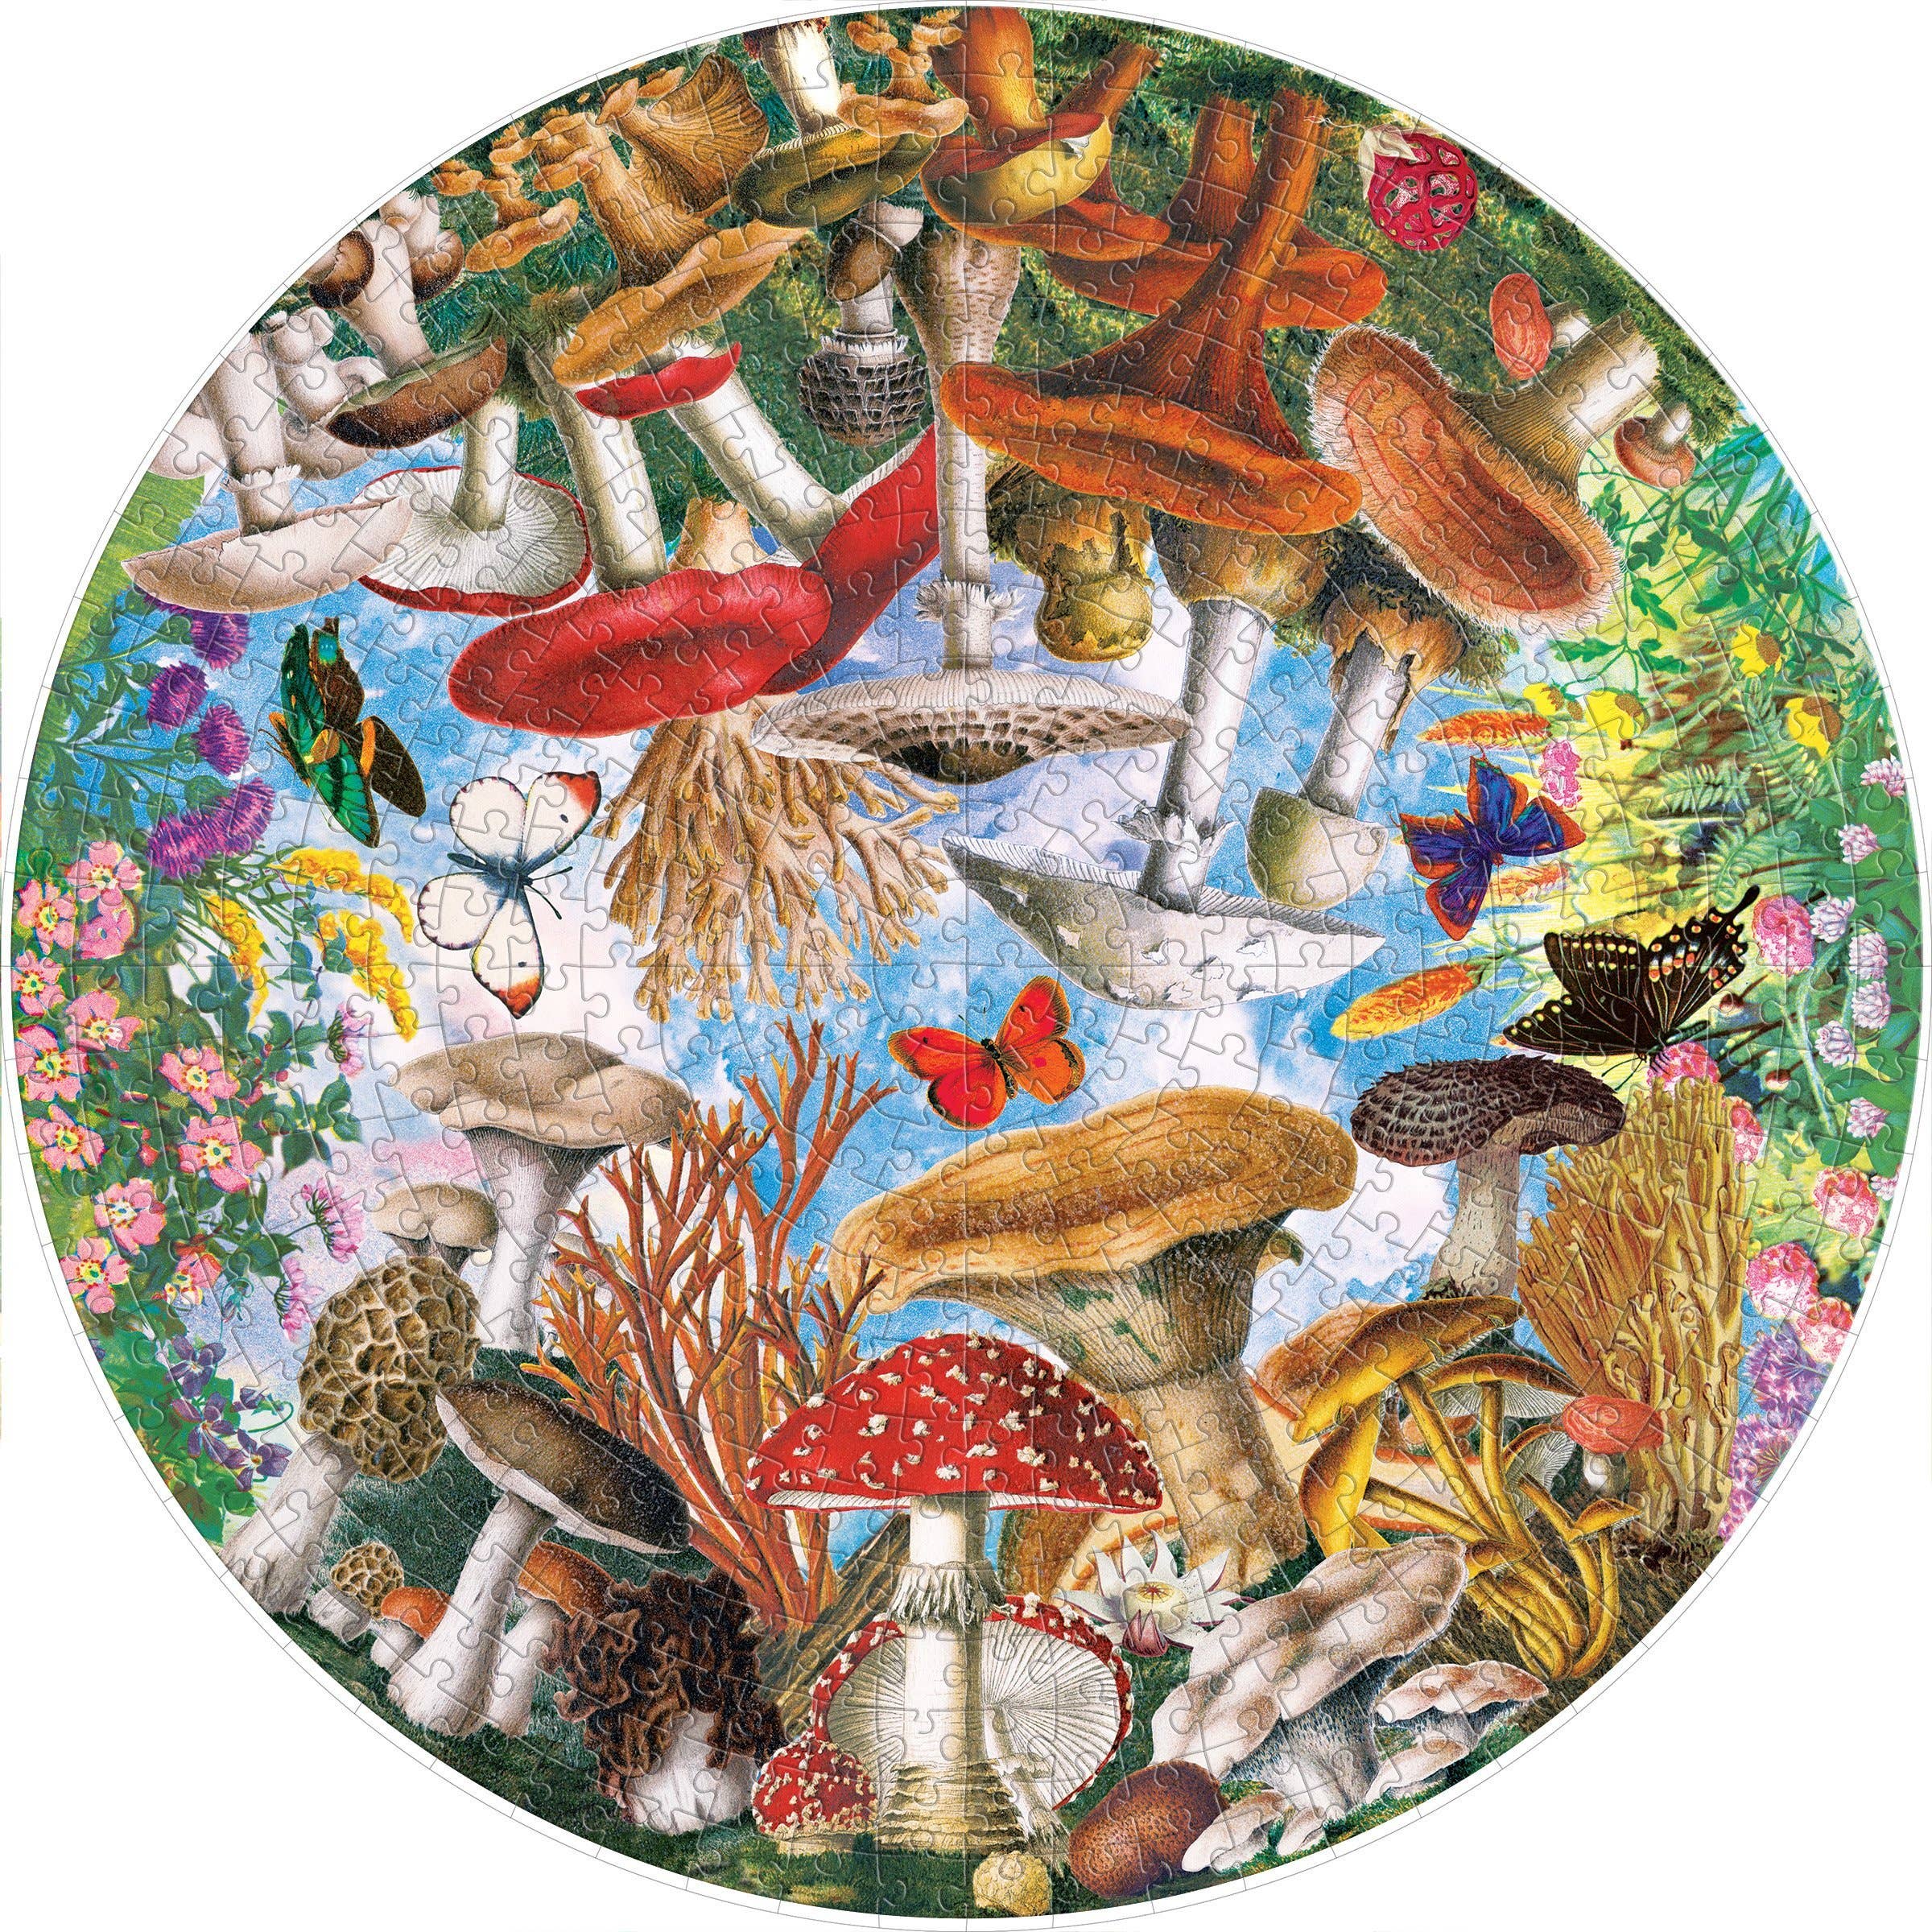 SALE- Mushrooms and Butterflies 500 Piece Round Puzzle